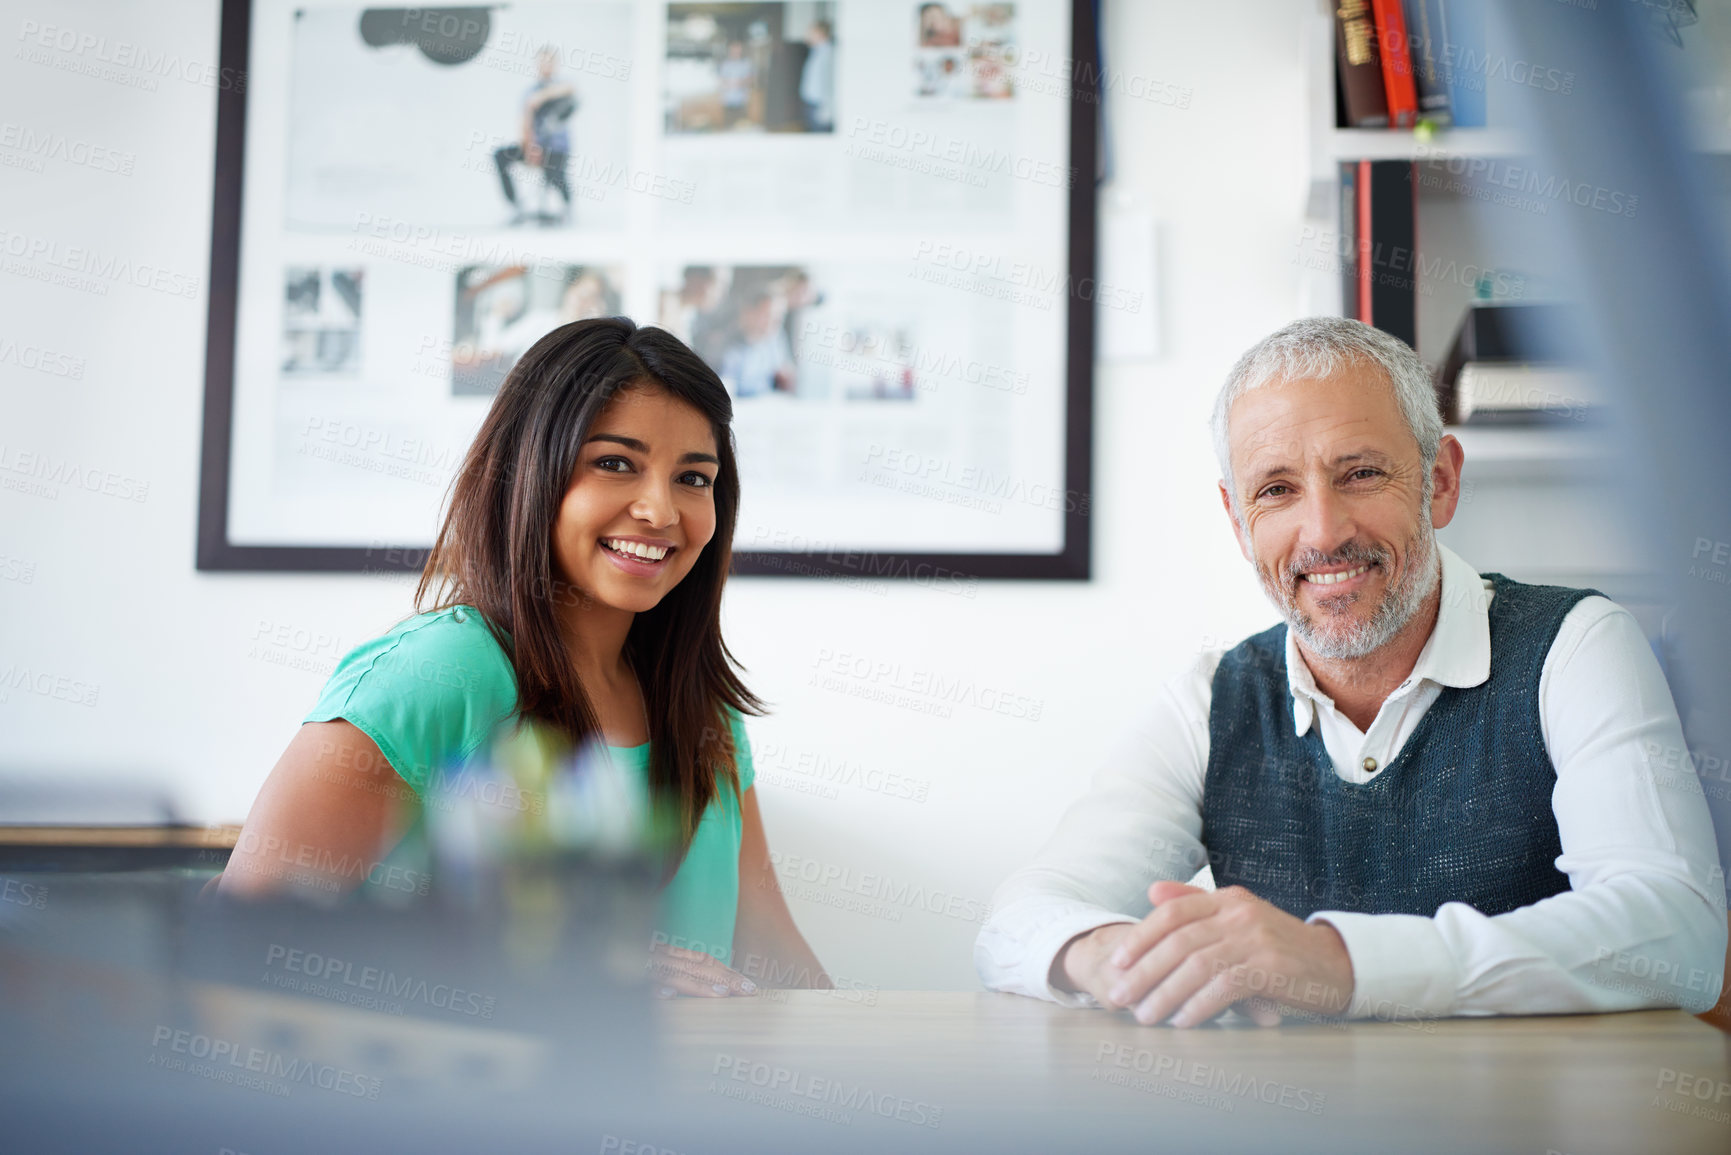 Buy stock photo Cropped portrait of two designers in their office